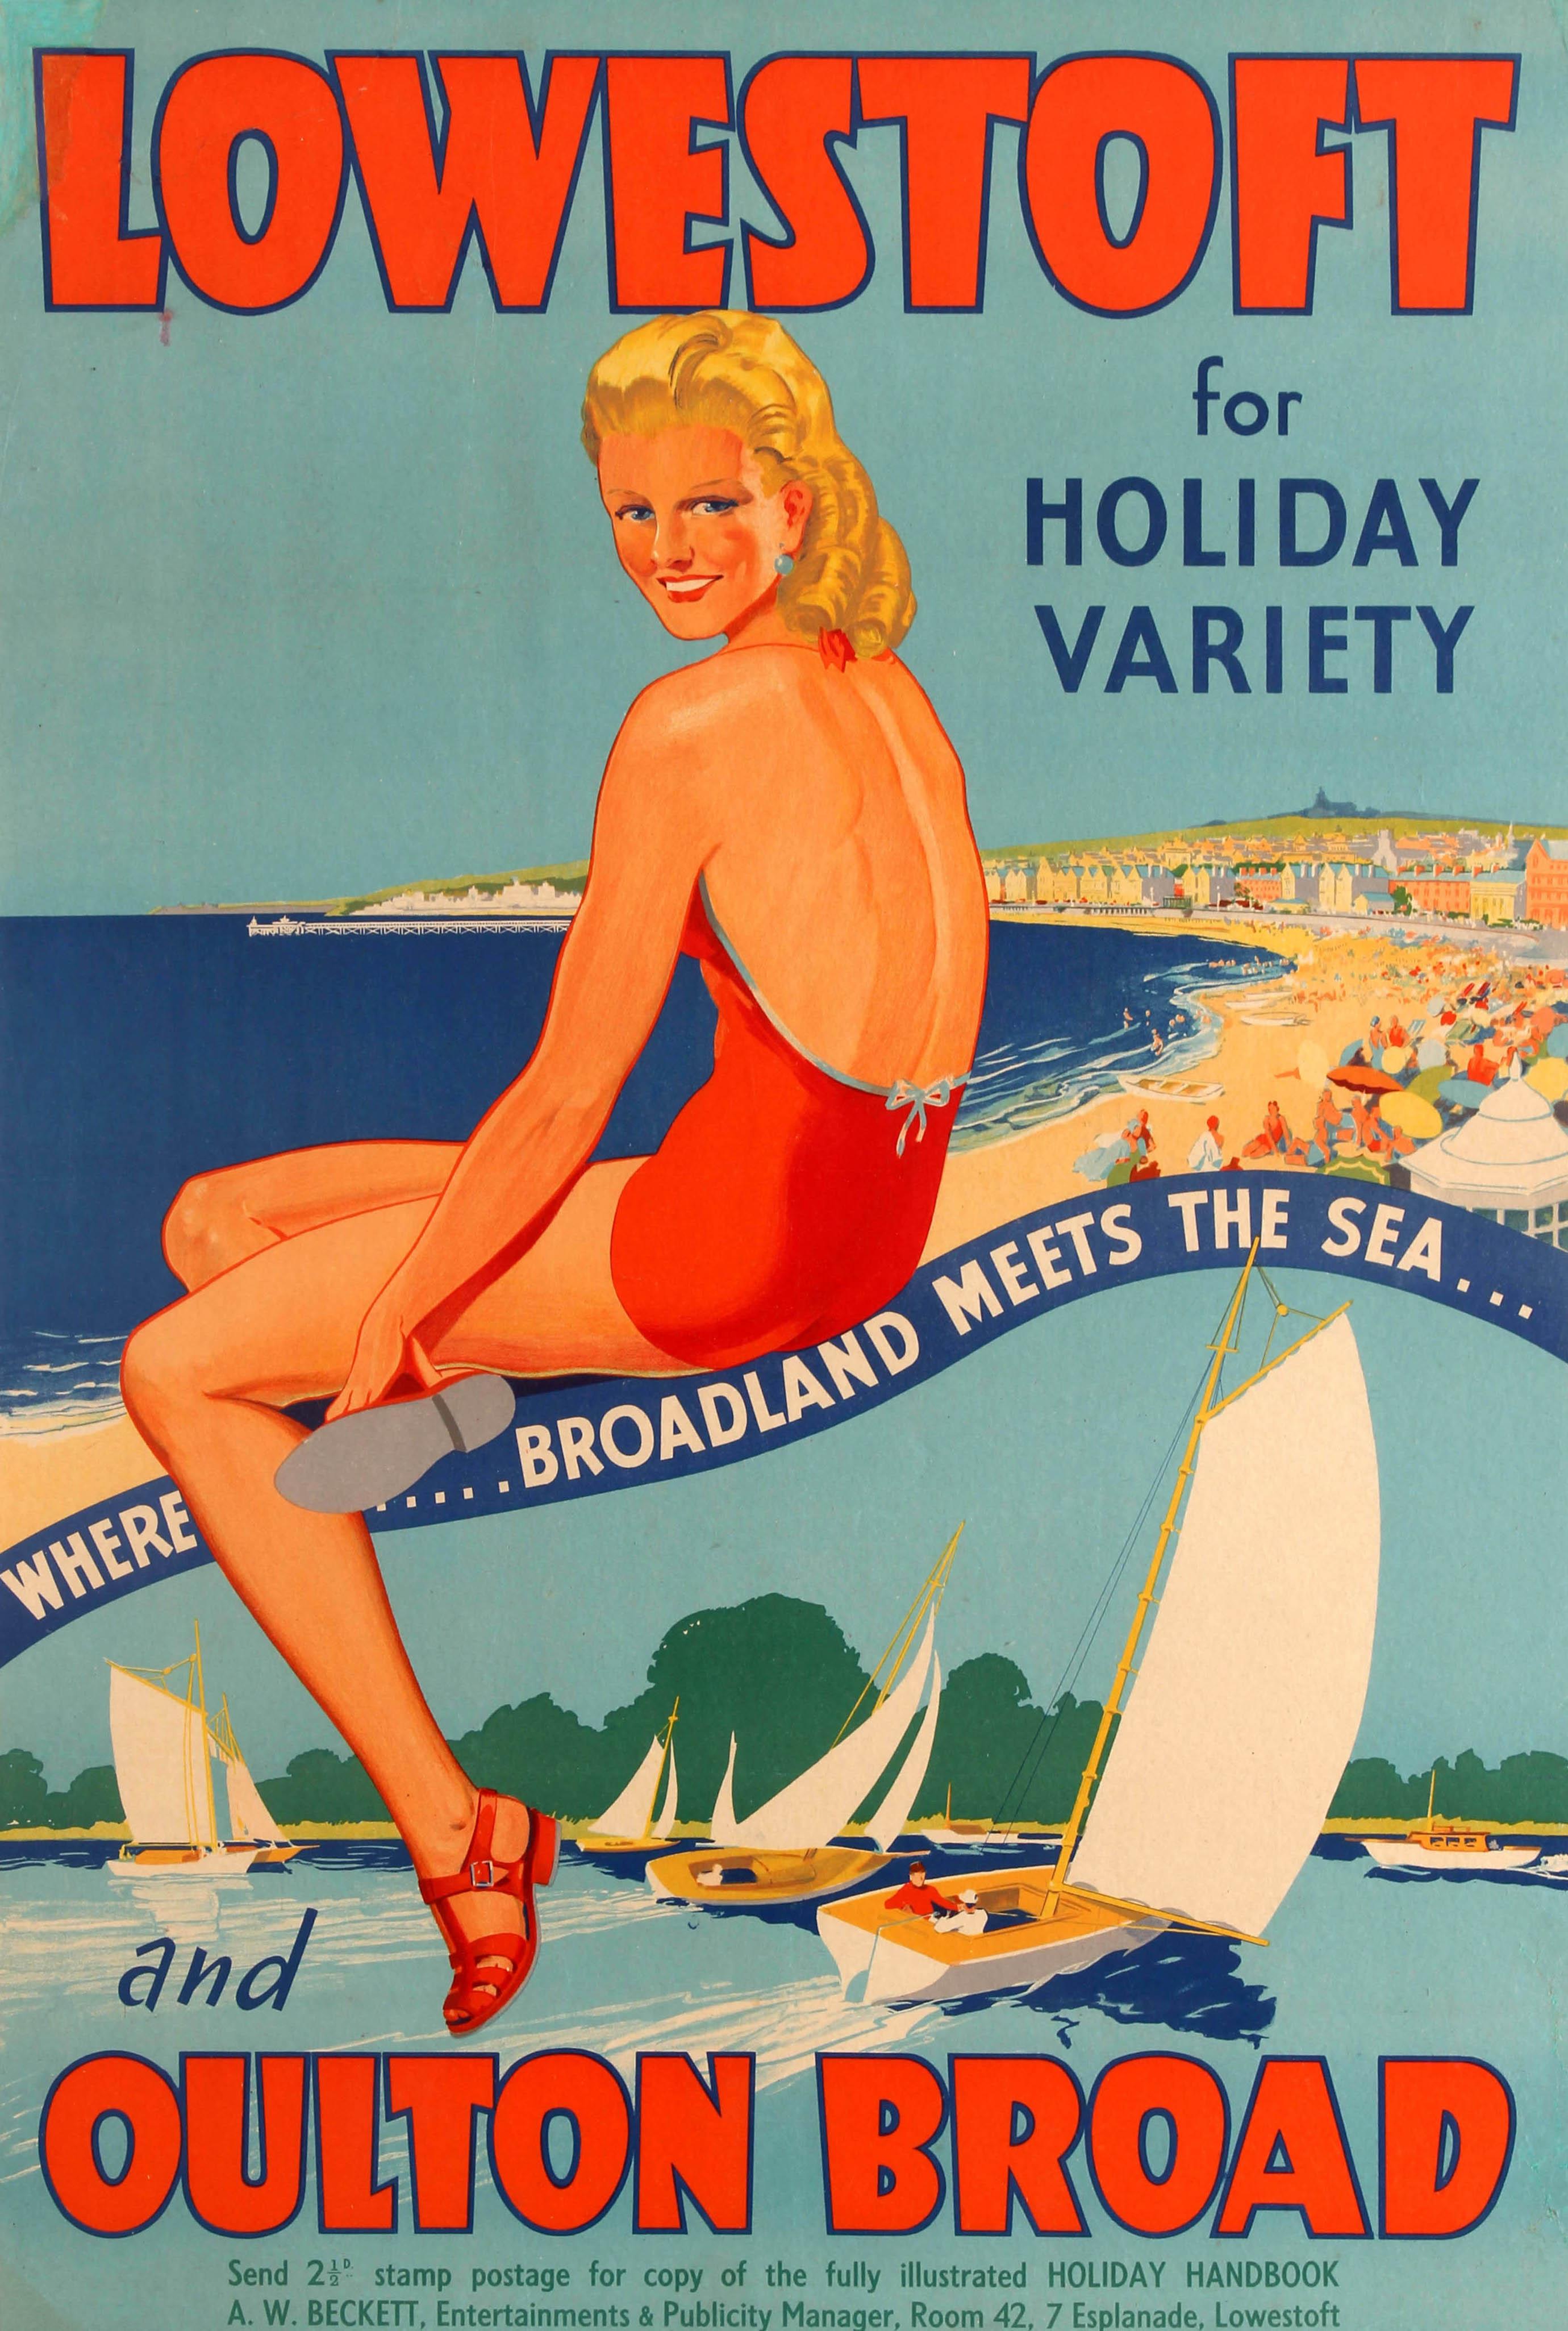 Original Vintage Travel Poster Lowestoft And Oulton Broad For Holiday Variety - Print by Unknown